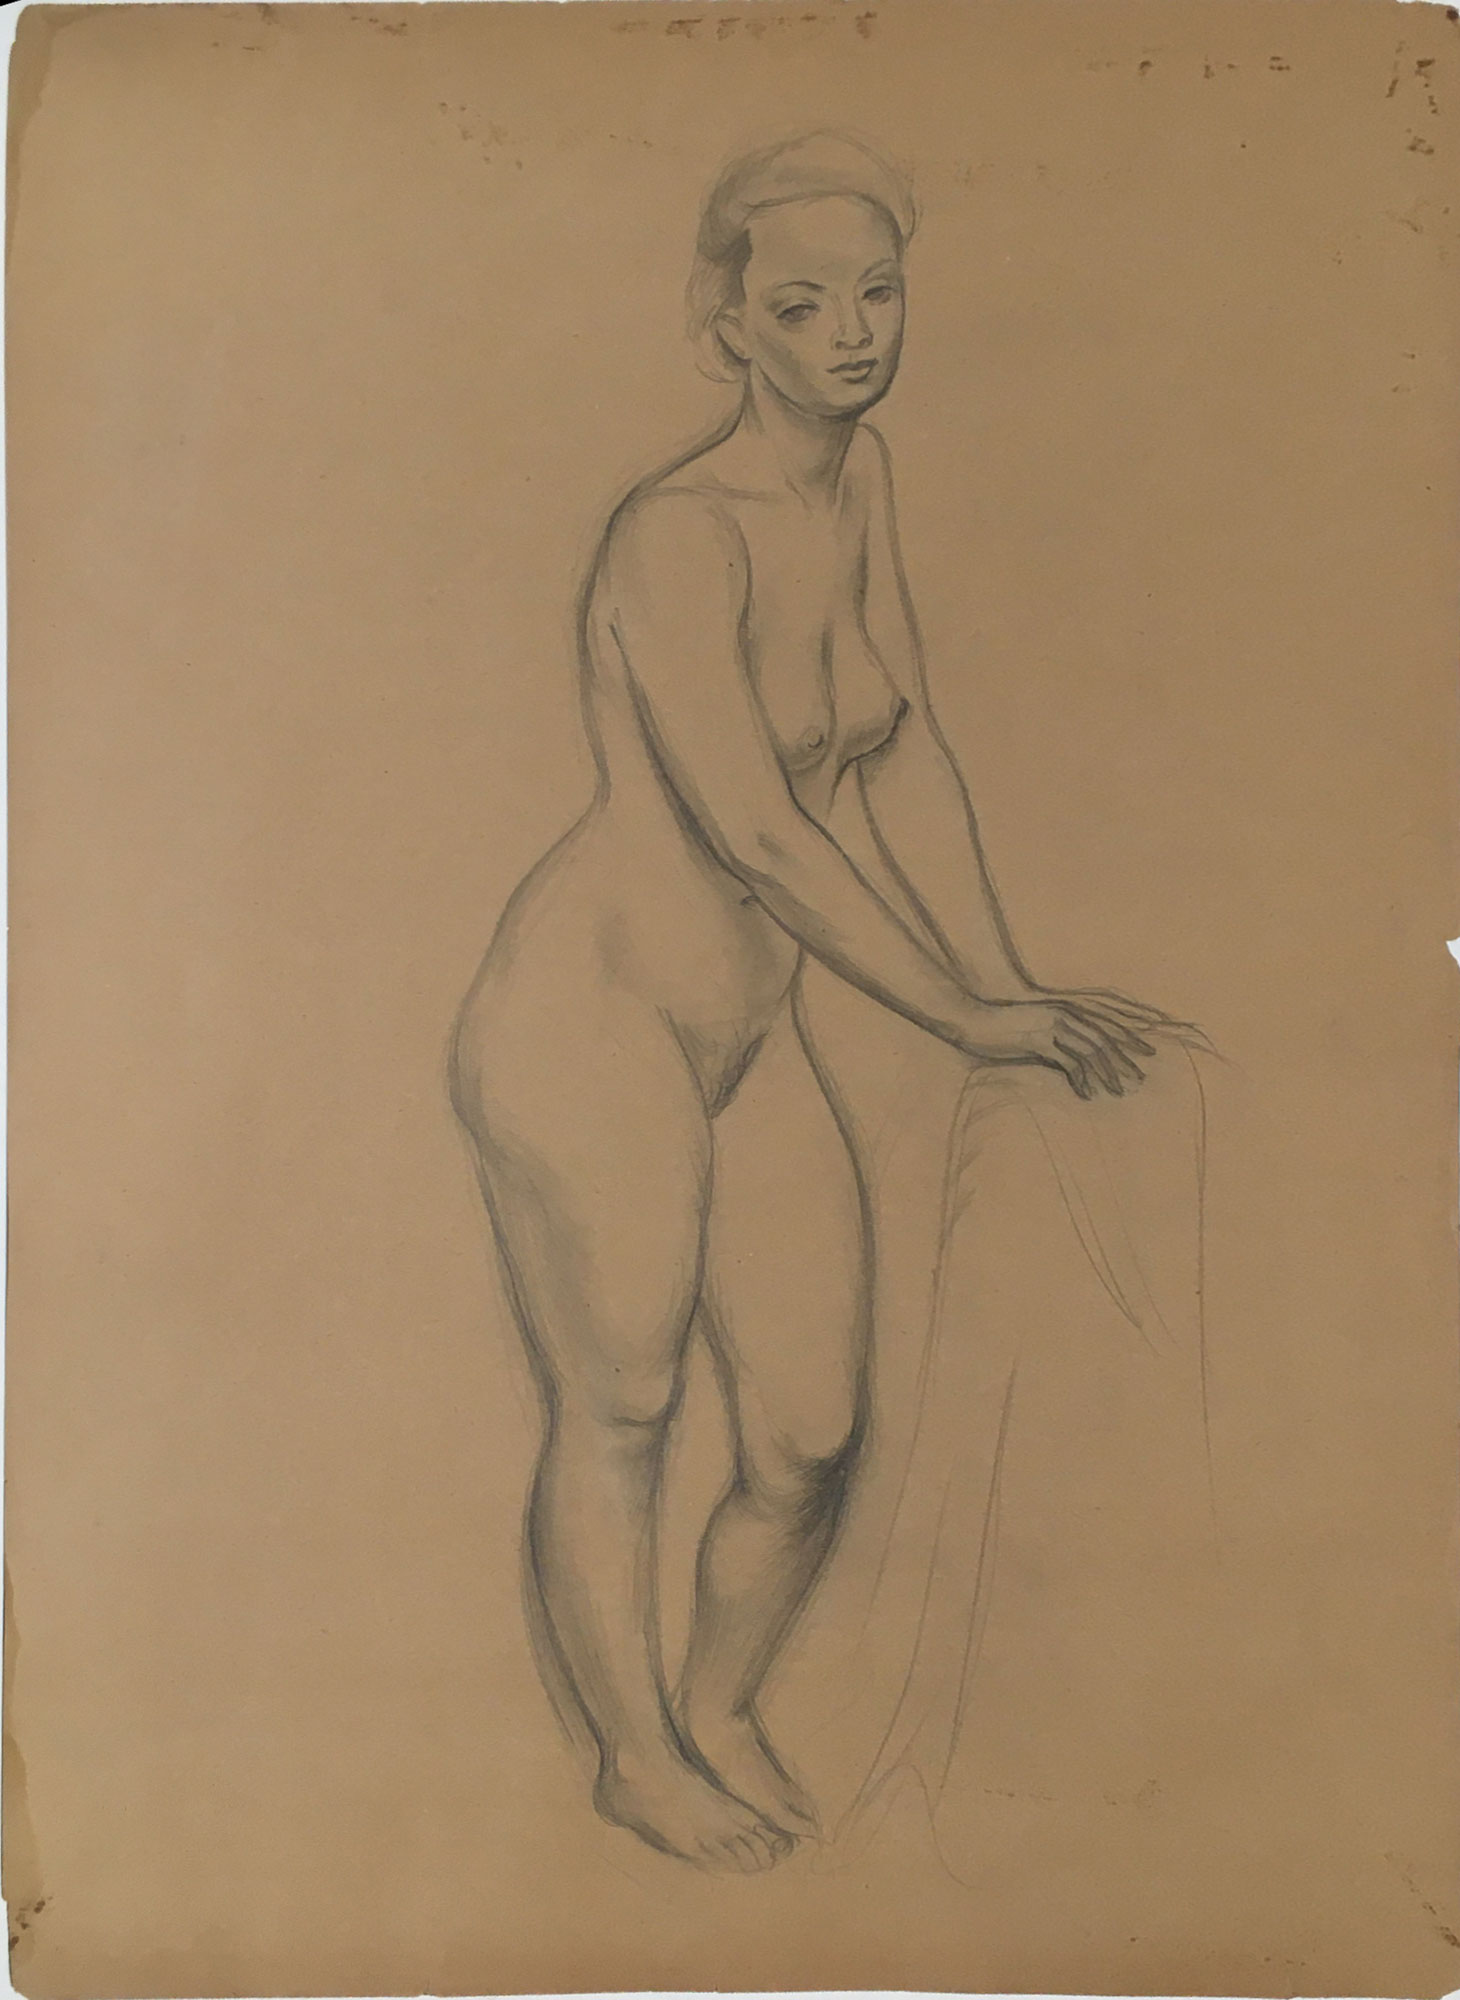 GRACE CLEMENTS Standing Nude at Chair